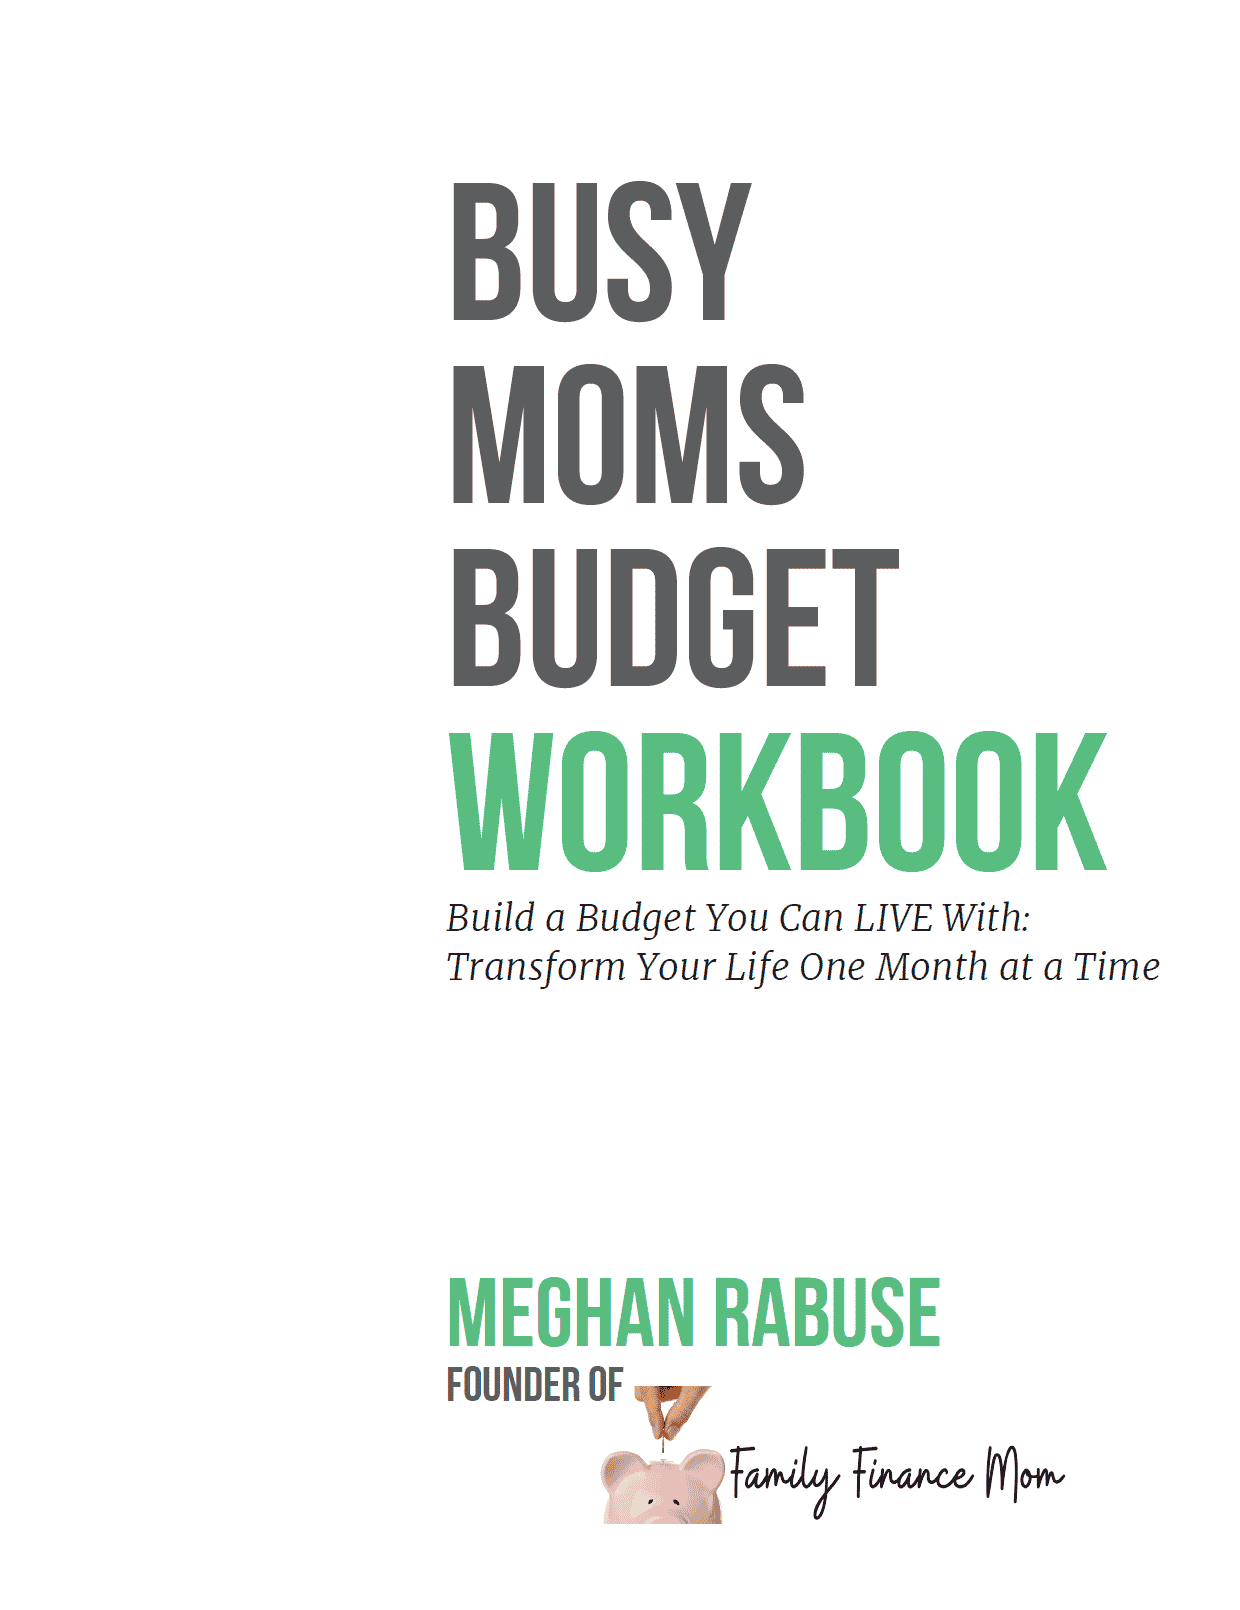 Cover of the Busy Moms Budget Workbook by Family Finance Mom